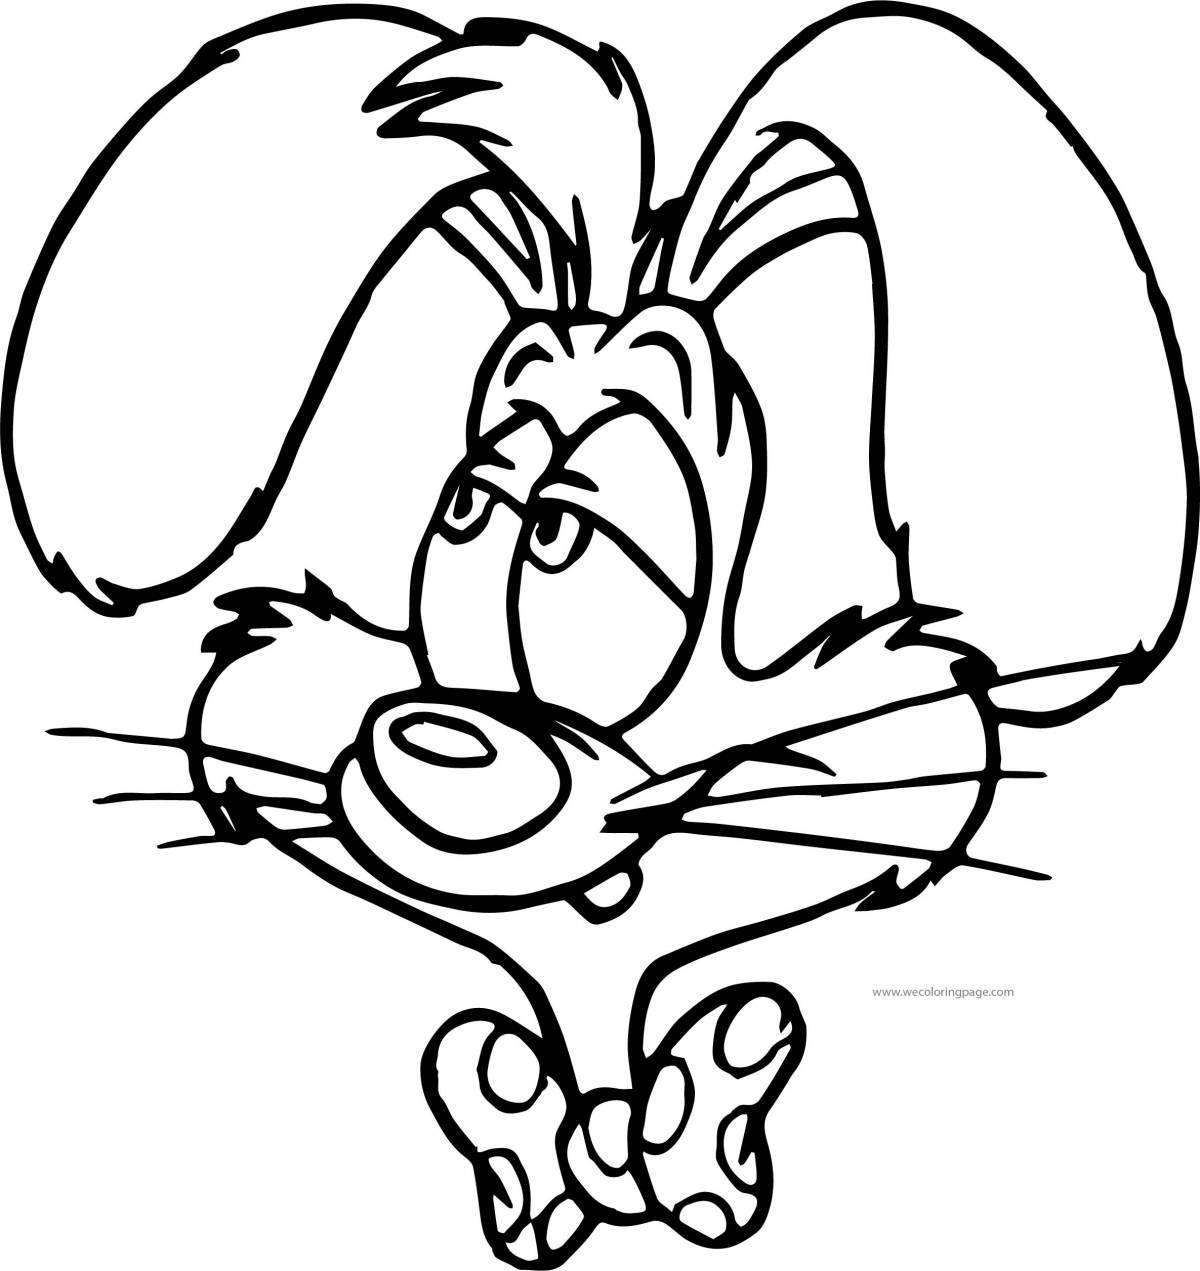 Great roger rabbit coloring book